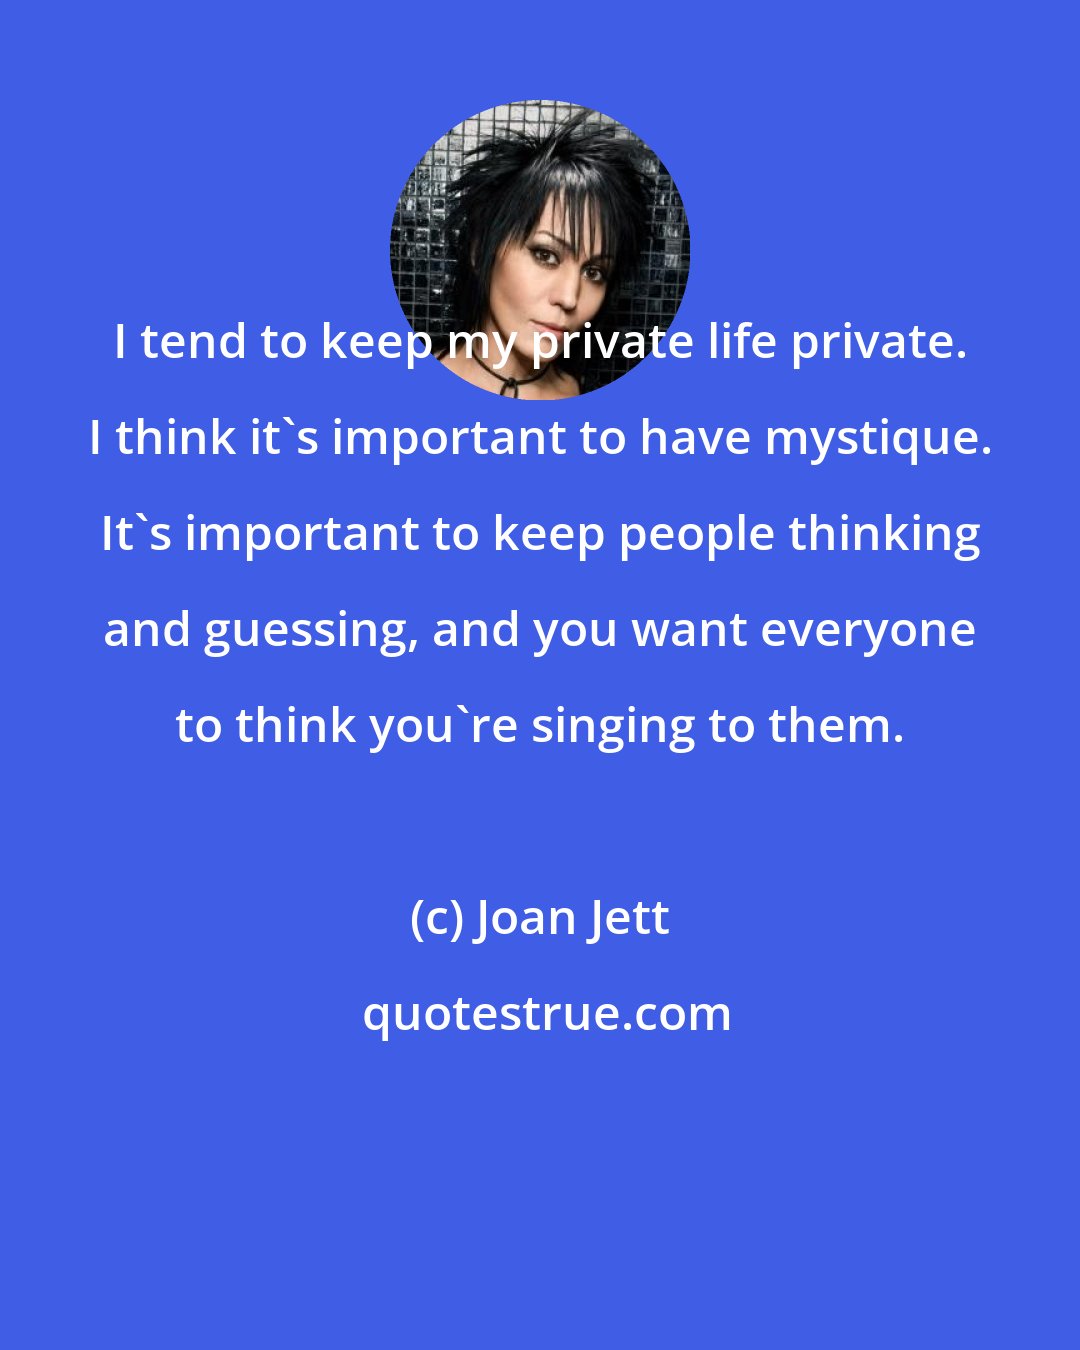 Joan Jett: I tend to keep my private life private. I think it's important to have mystique. It's important to keep people thinking and guessing, and you want everyone to think you're singing to them.